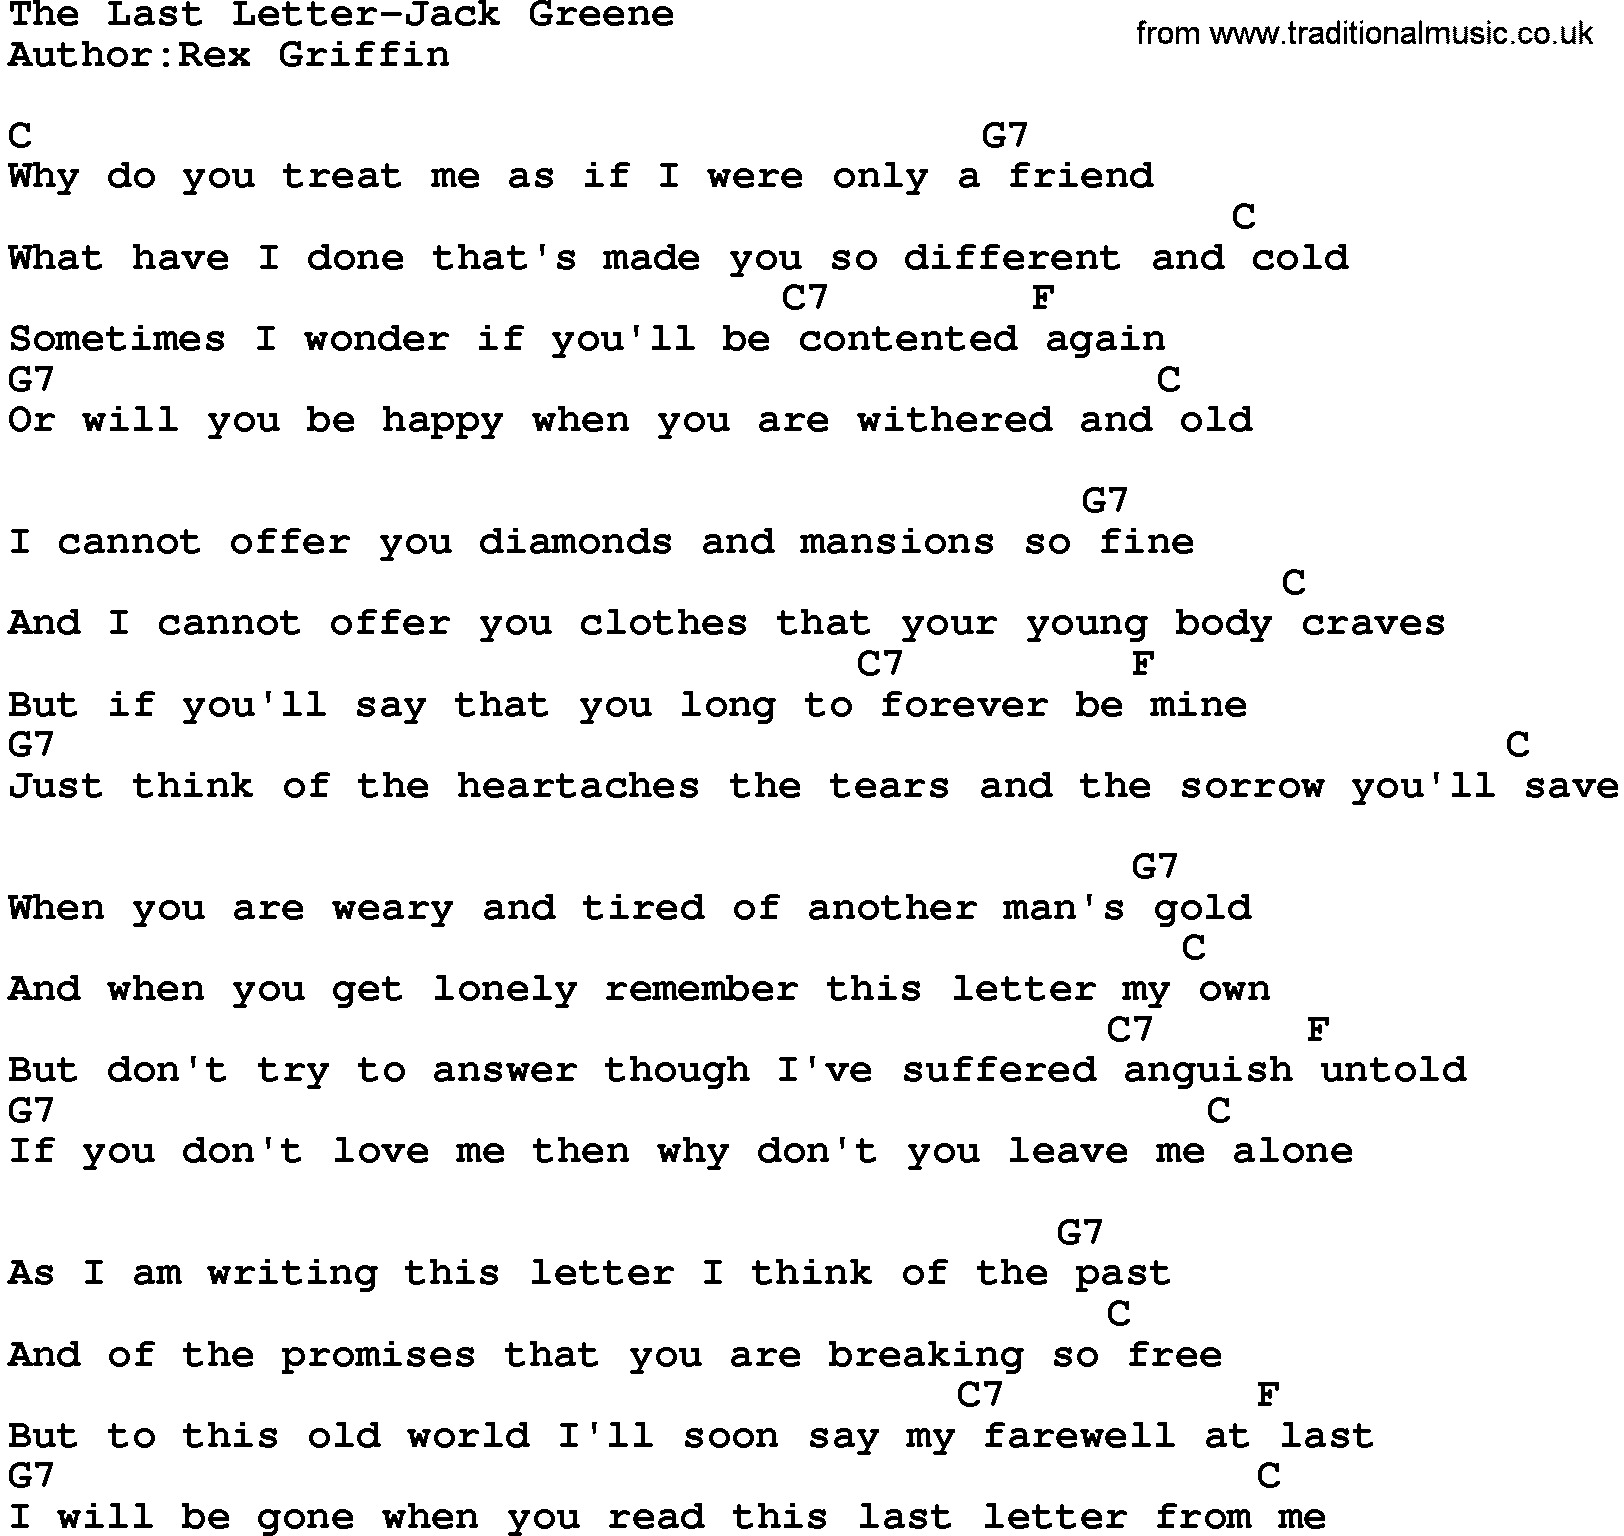 Country music song: The Last Letter-Jack Greene  lyrics and chords